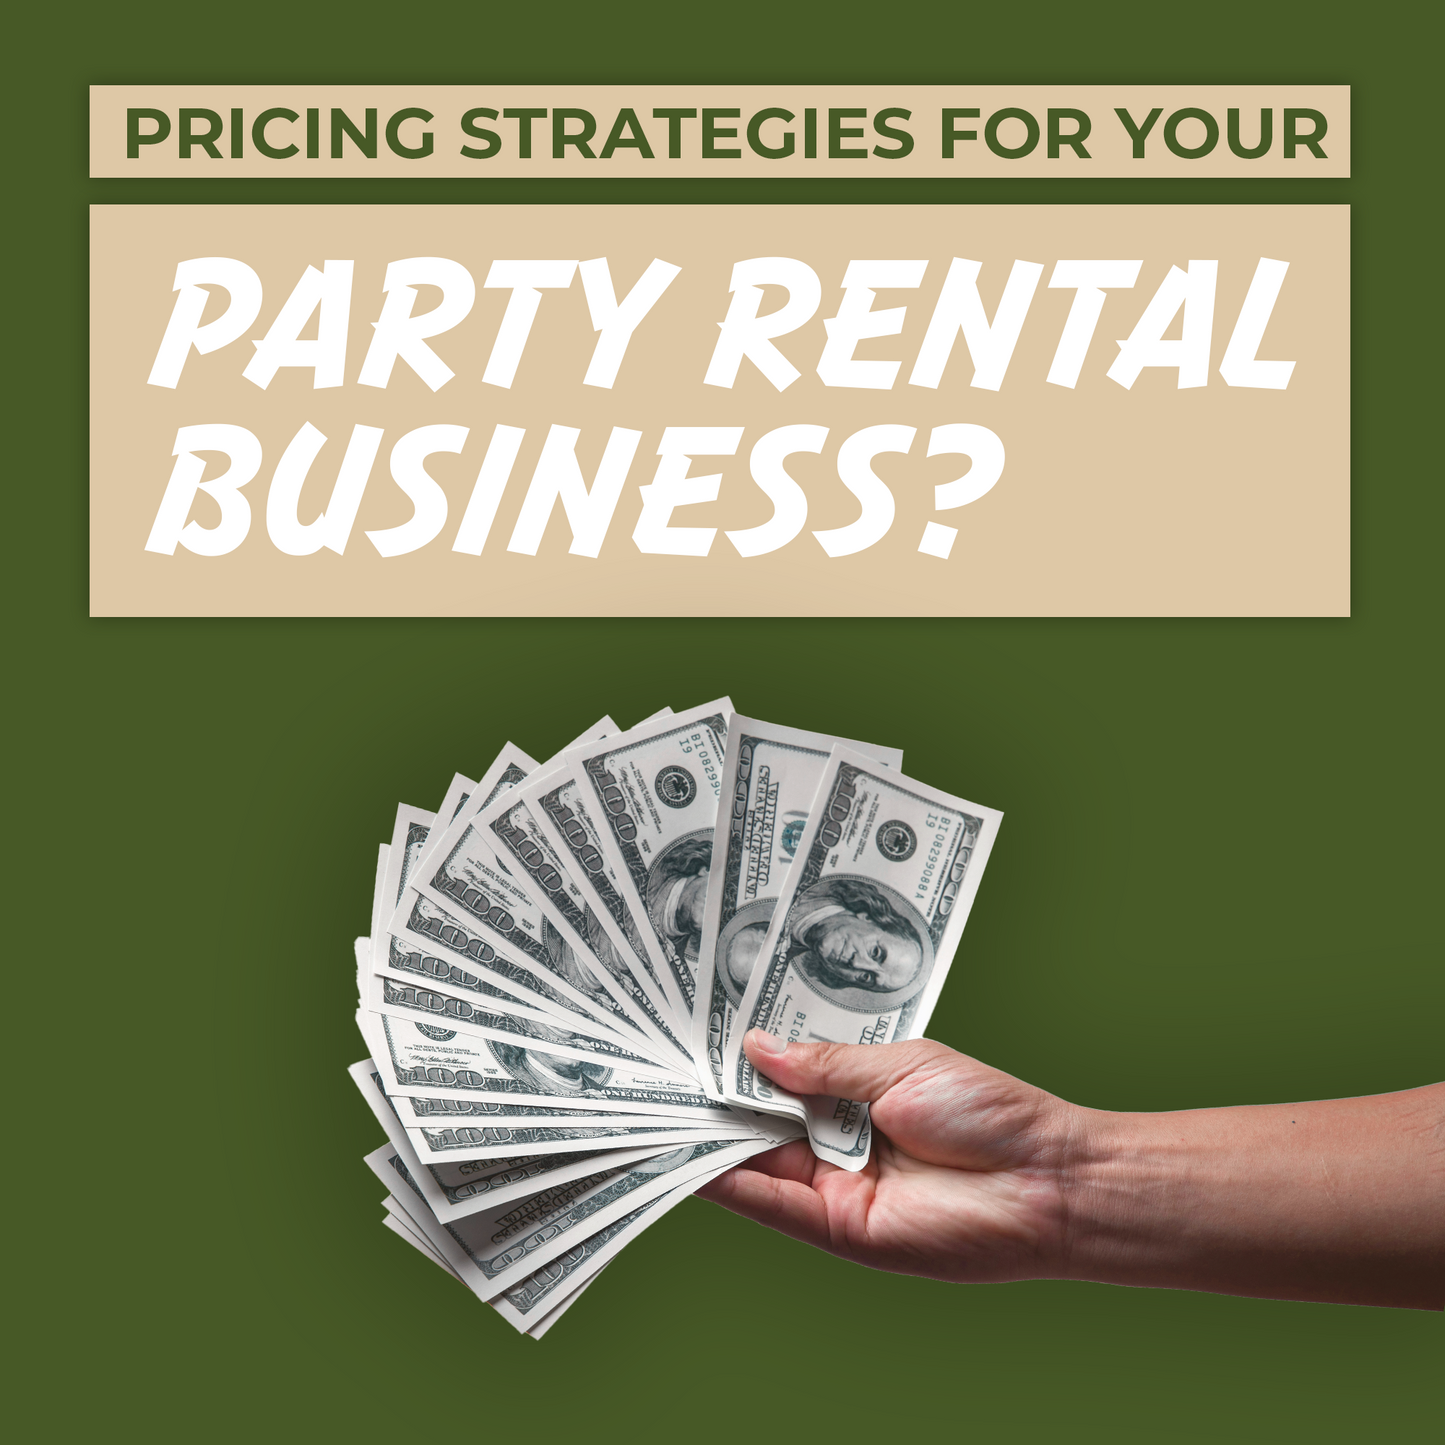 Pricing Strategies for Your Party Rental Business